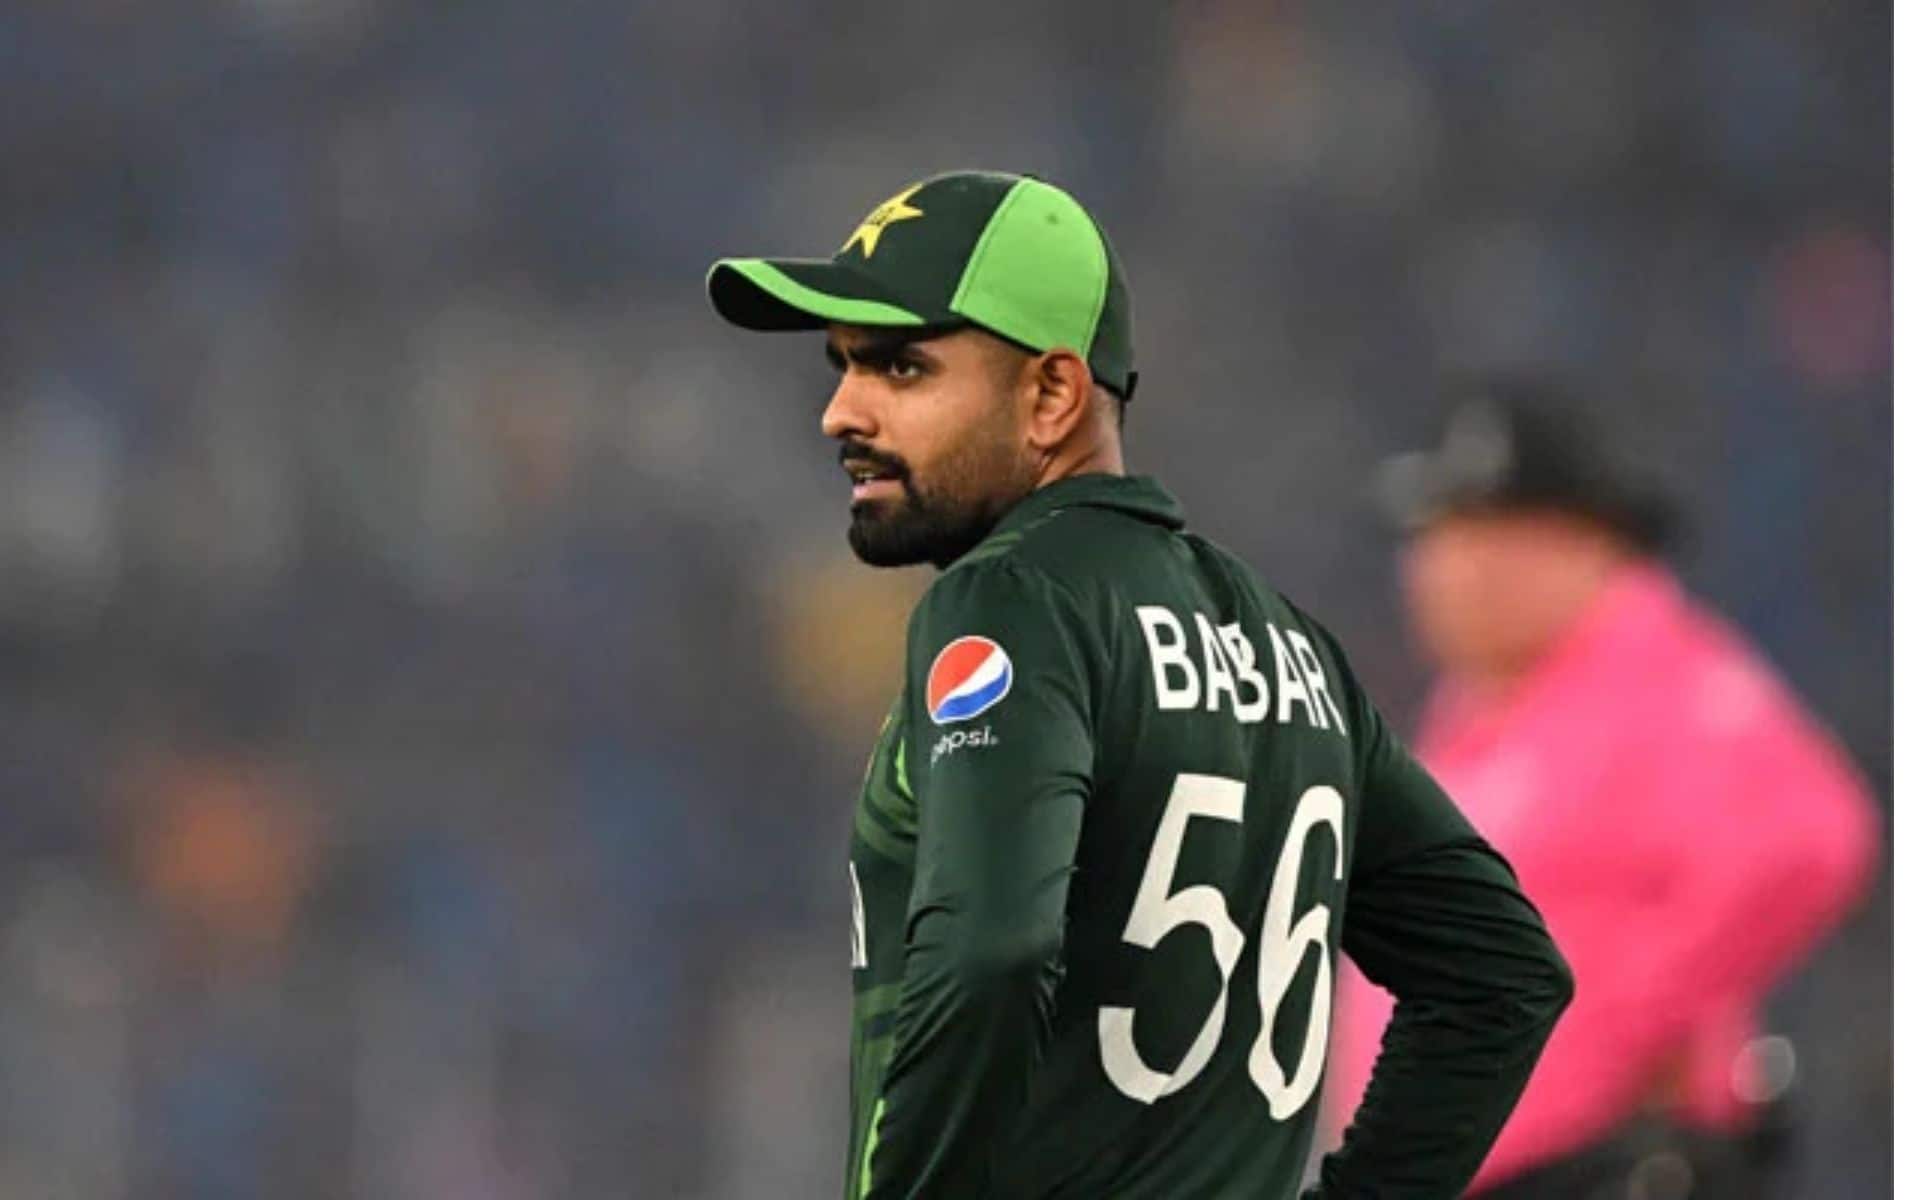 Babar Azam confident of Pakistan giving good fight at T20 World Cup (X.com)